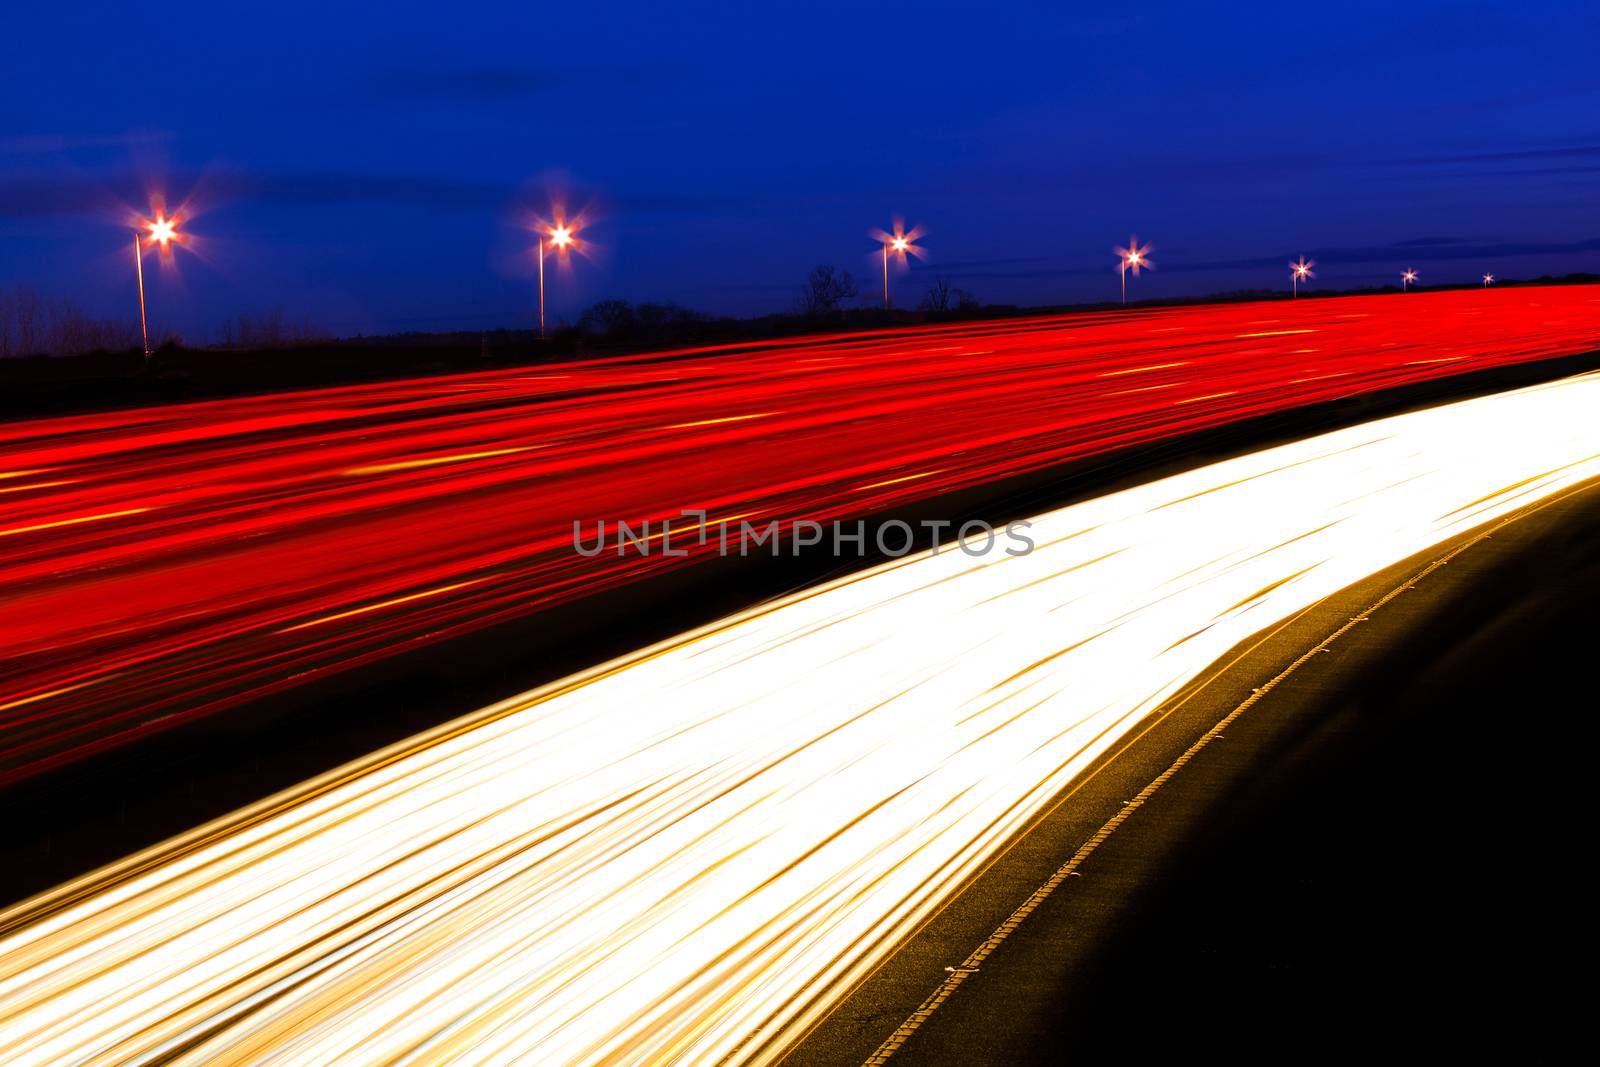 Cars and lorries leave ghostly light trails as they pass by quic by allouphoto